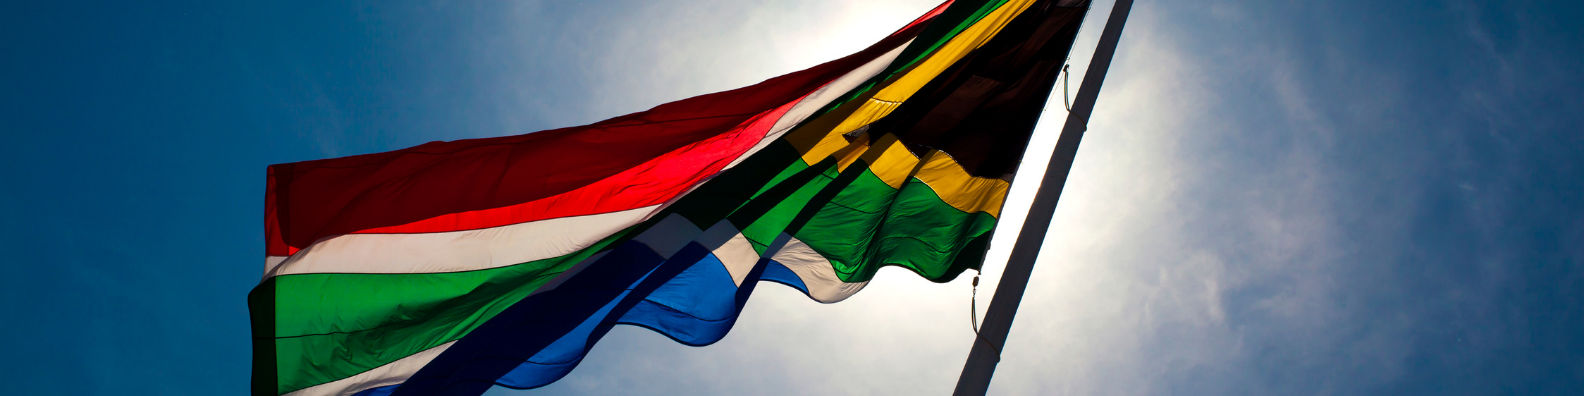 ICASA makes available lower spectrum at 6 GHz- South Africa